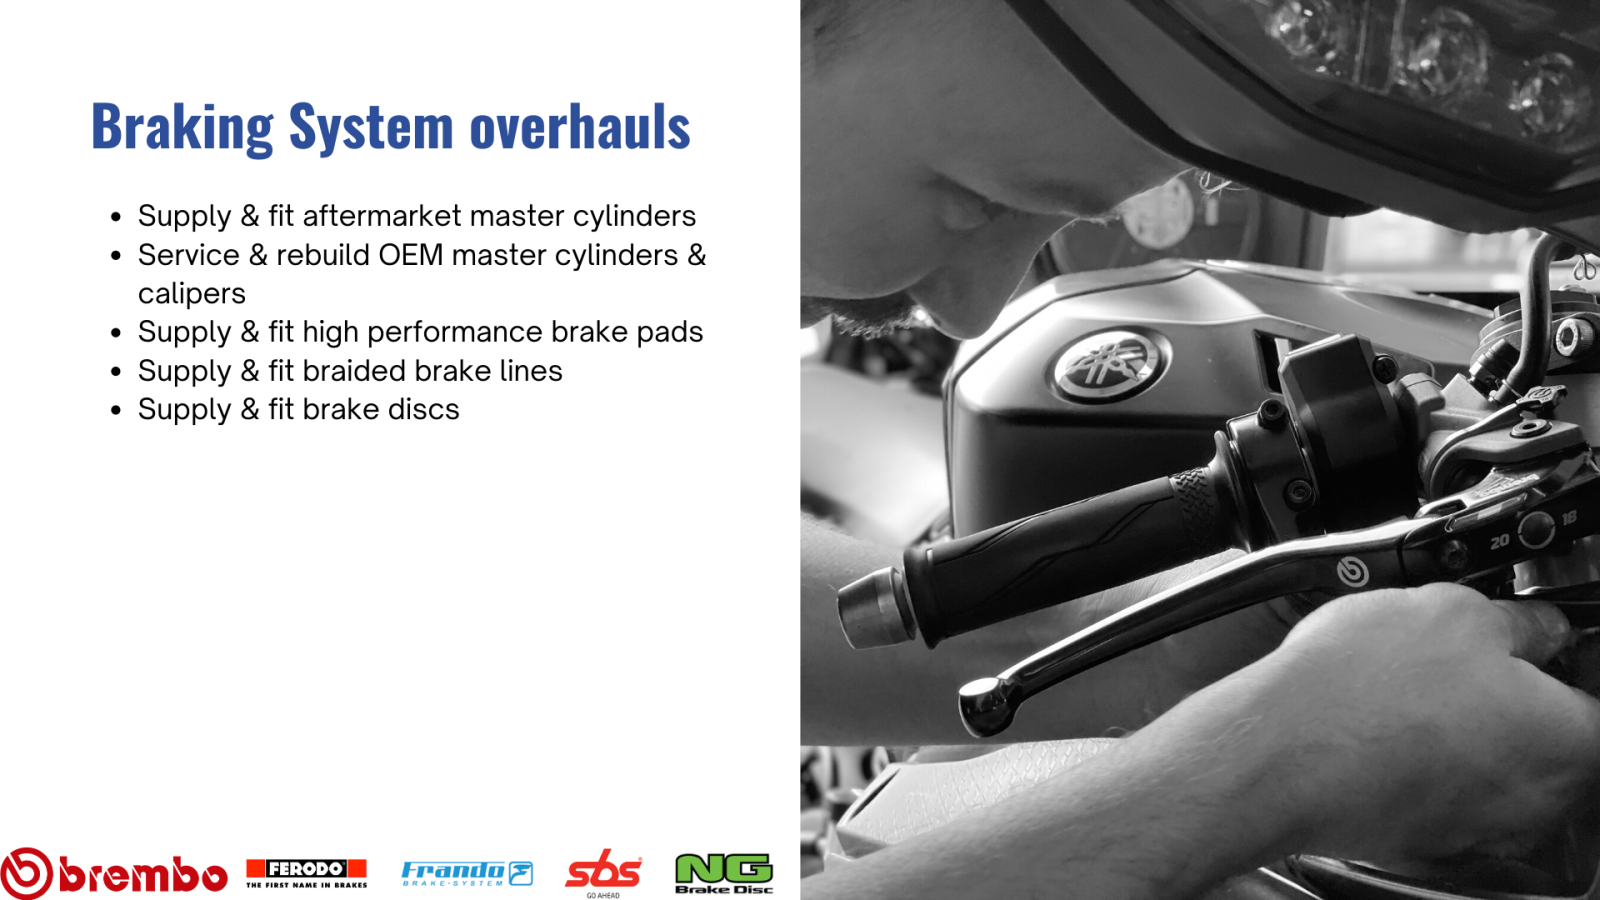 Braking System overhauls  Supply & fit aftermarket master cylinders Service & rebuild OEM master cylinders & calipers Supply & fit high performance brake pads Supply & fit braided brake lines Supply & fit brake discs